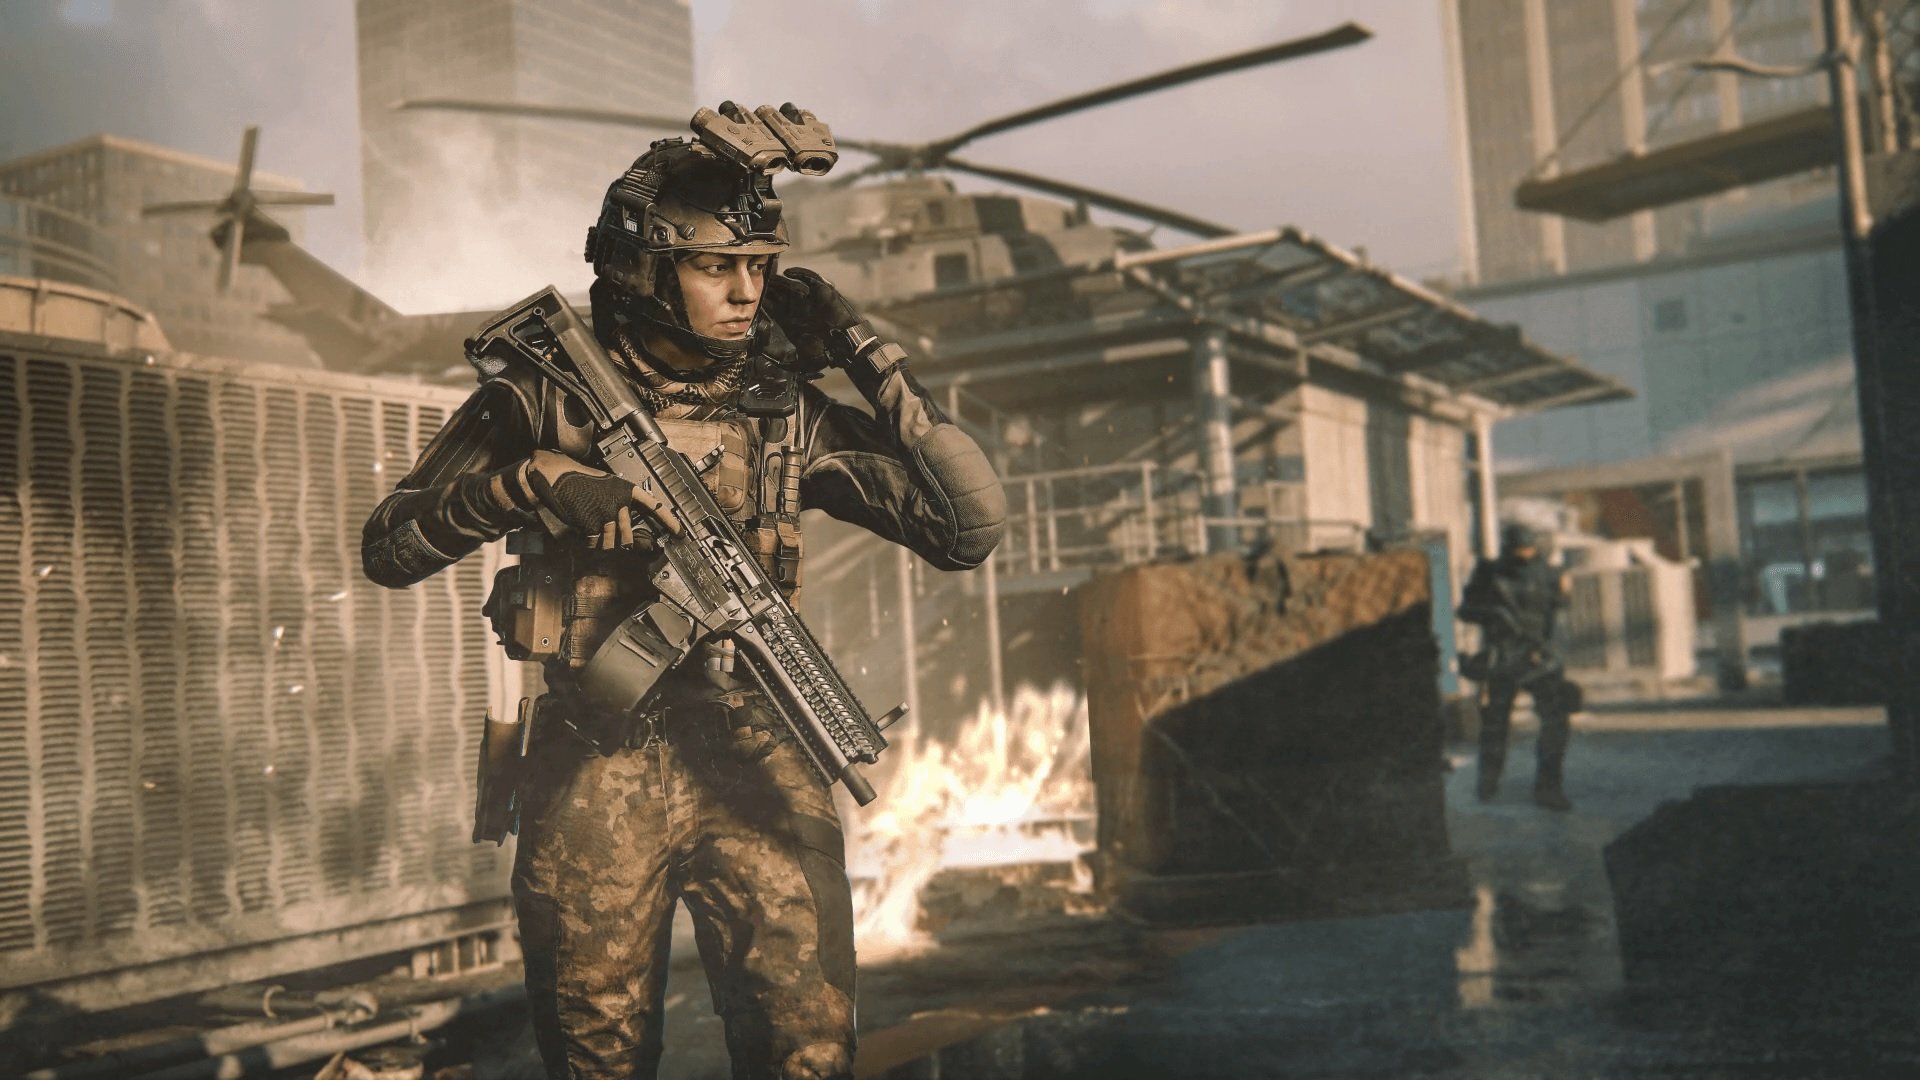 Call Of Duty: Modern Warfare 3 tips for getting better at